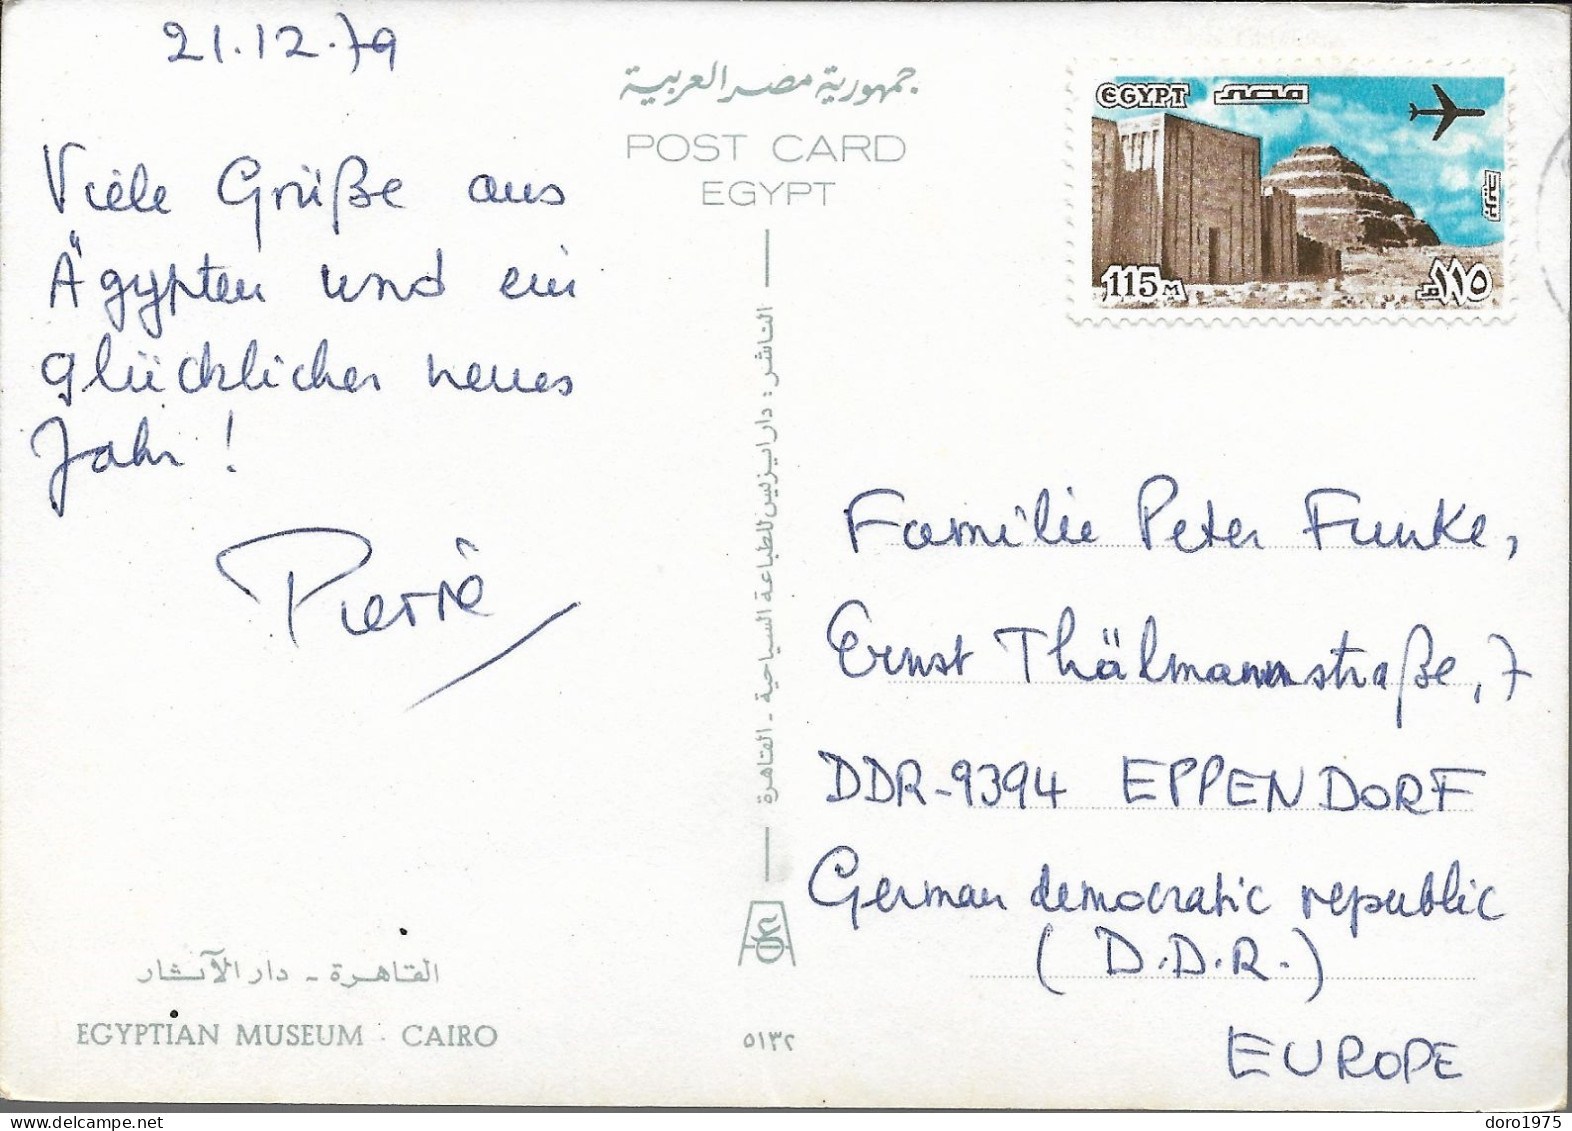 EGYPT - The Egyptian Museum Cairo - Used Postcard - Museums